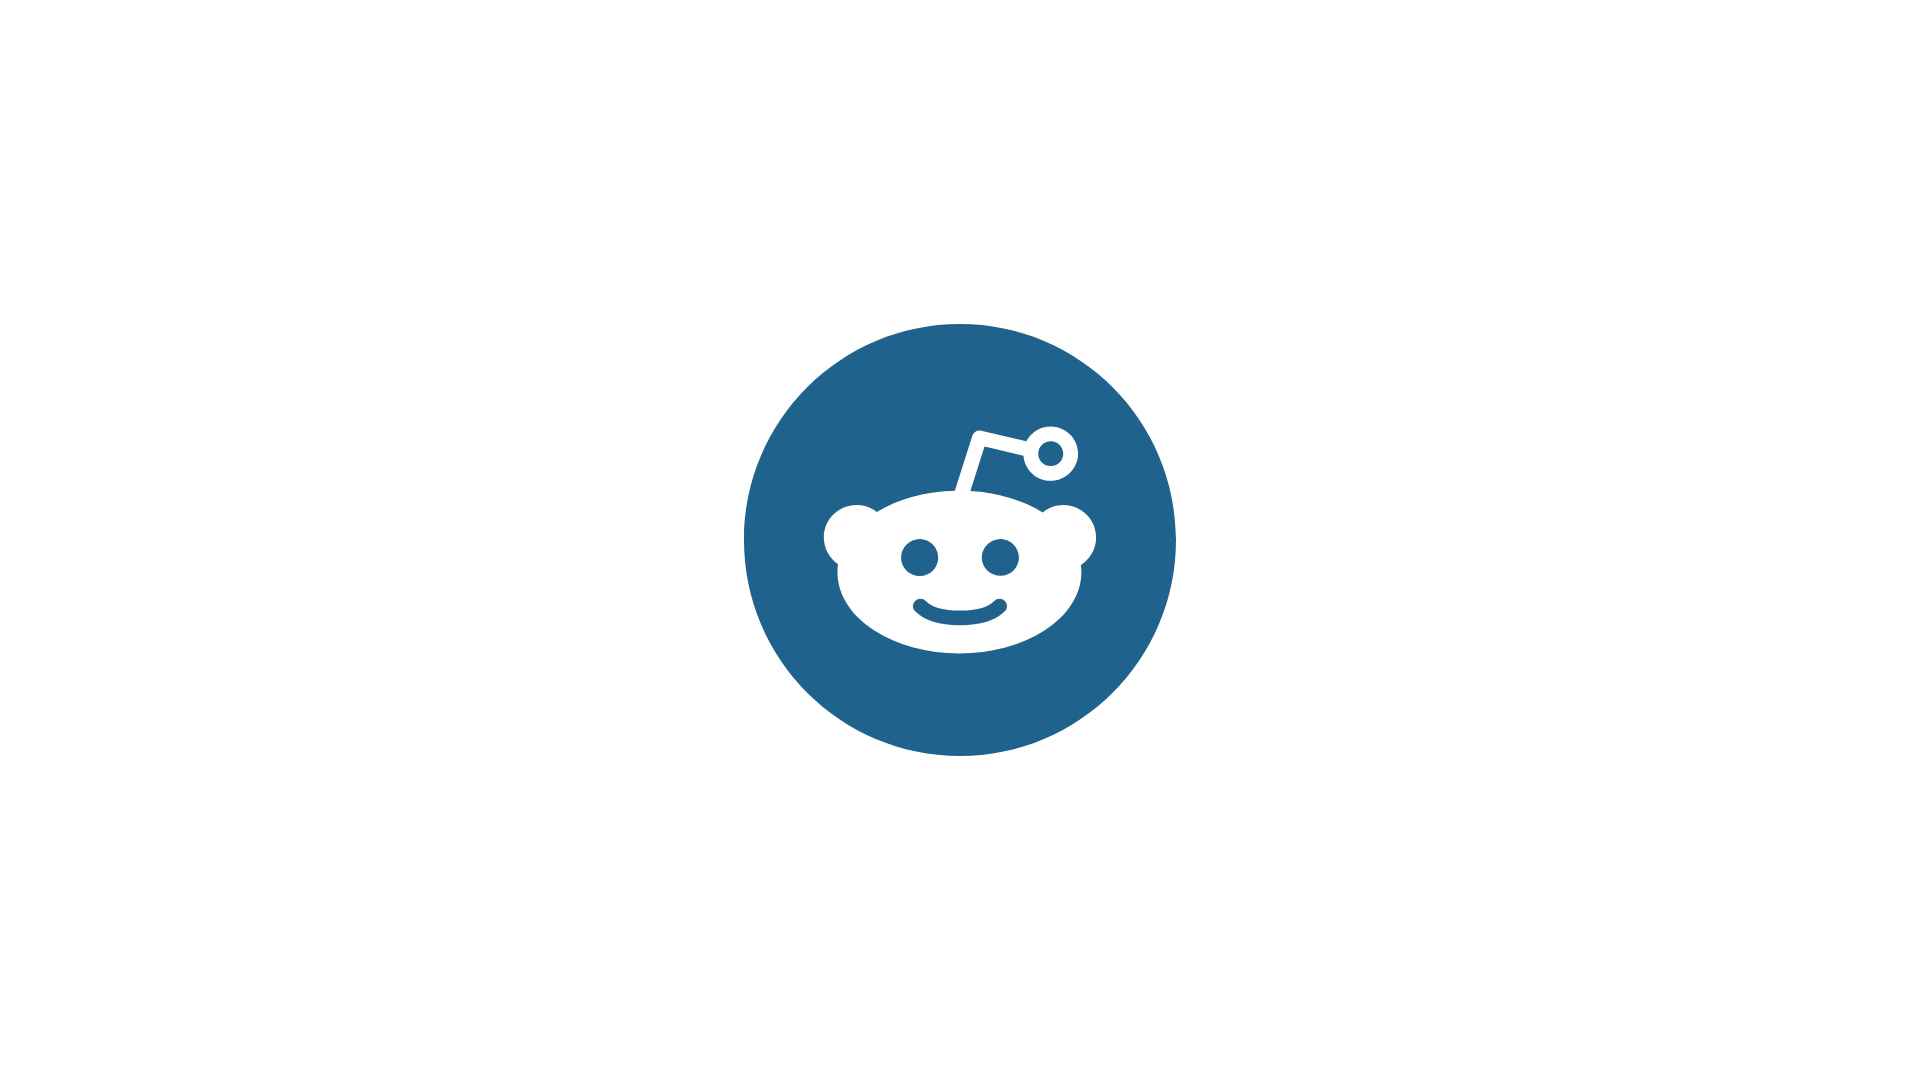 What are some important rules or guidelines that users should be aware of before posting on Reddit?